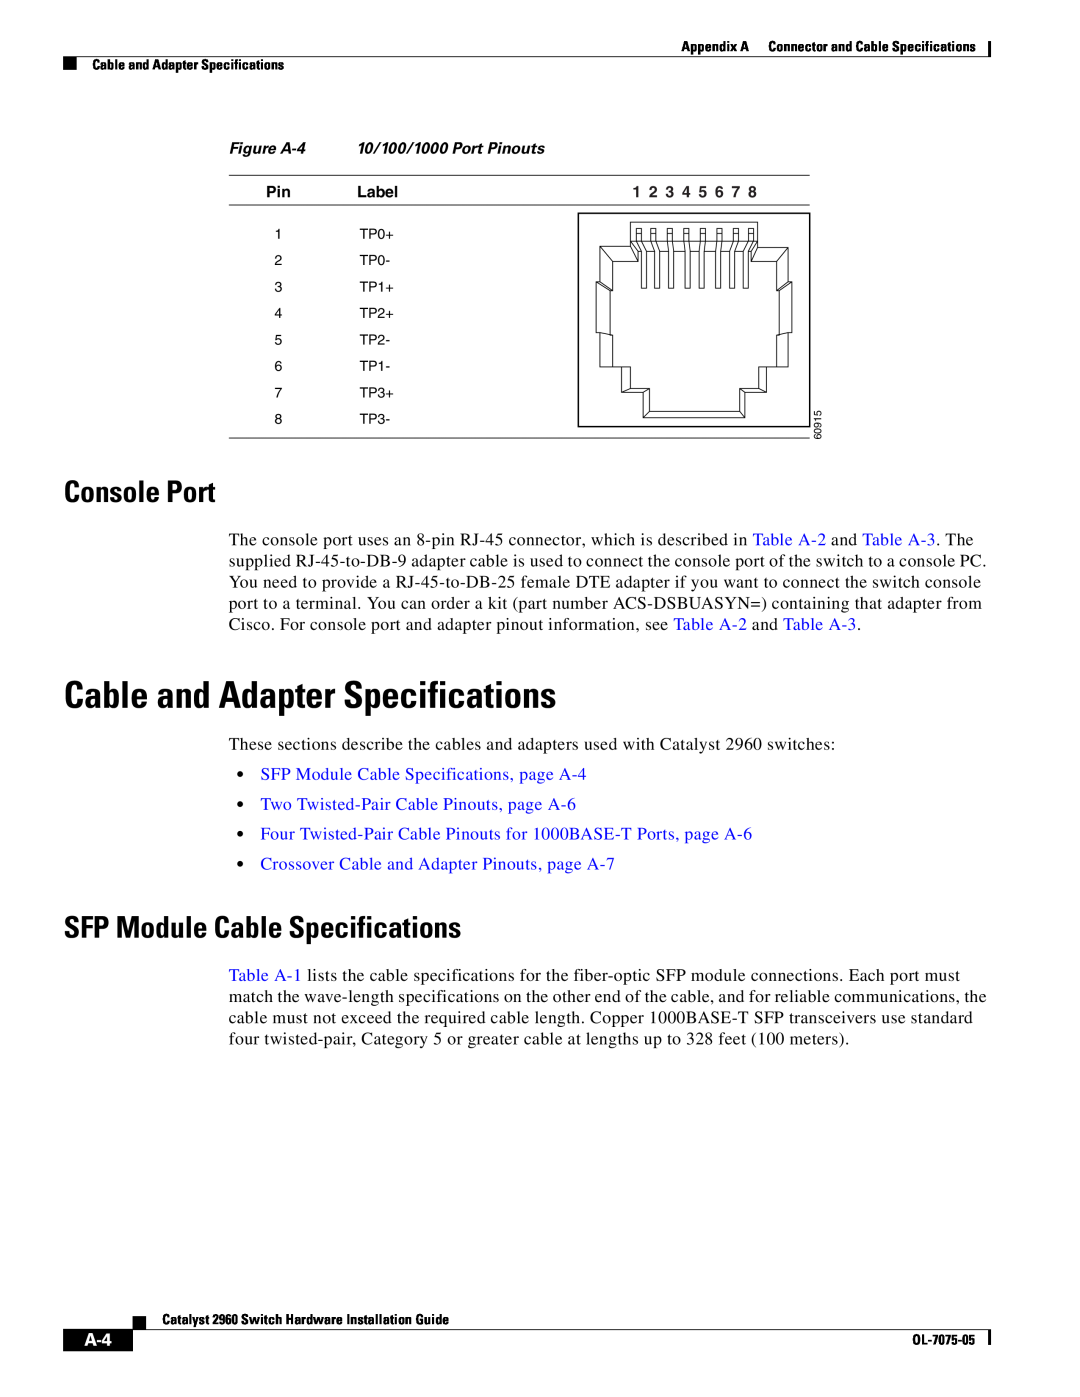 Cisco Systems 2960 specifications Cable and Adapter Specifications, SFP Module Cable Specifications, Console Port 